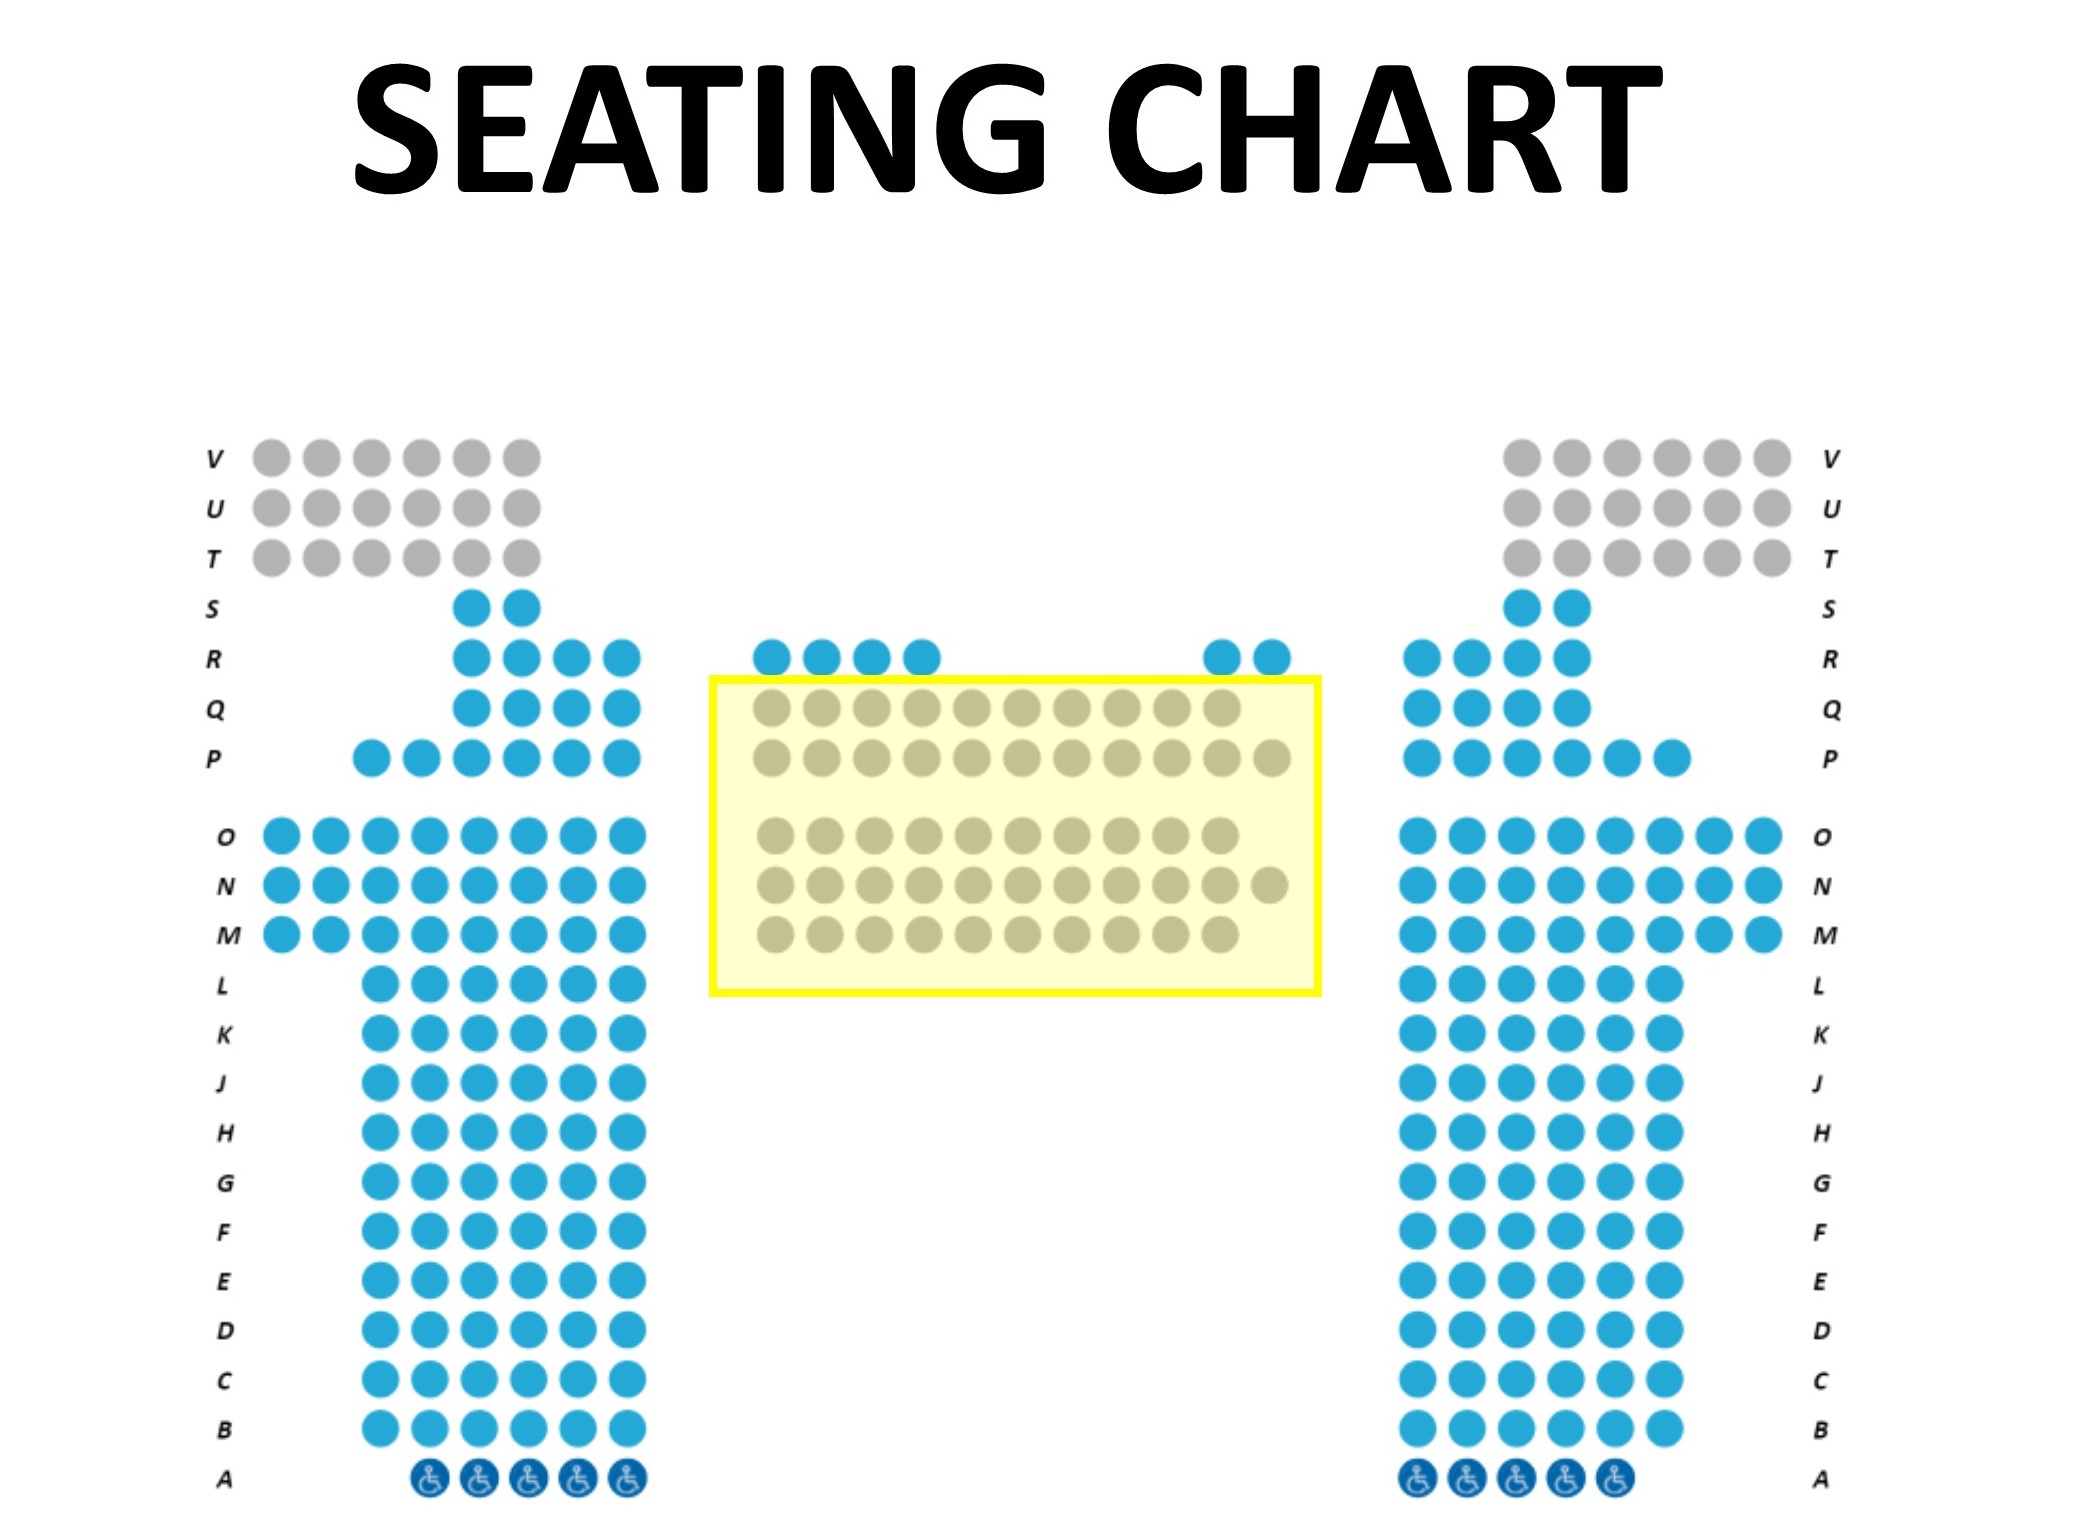 Colony Theater Miami Seating Chart